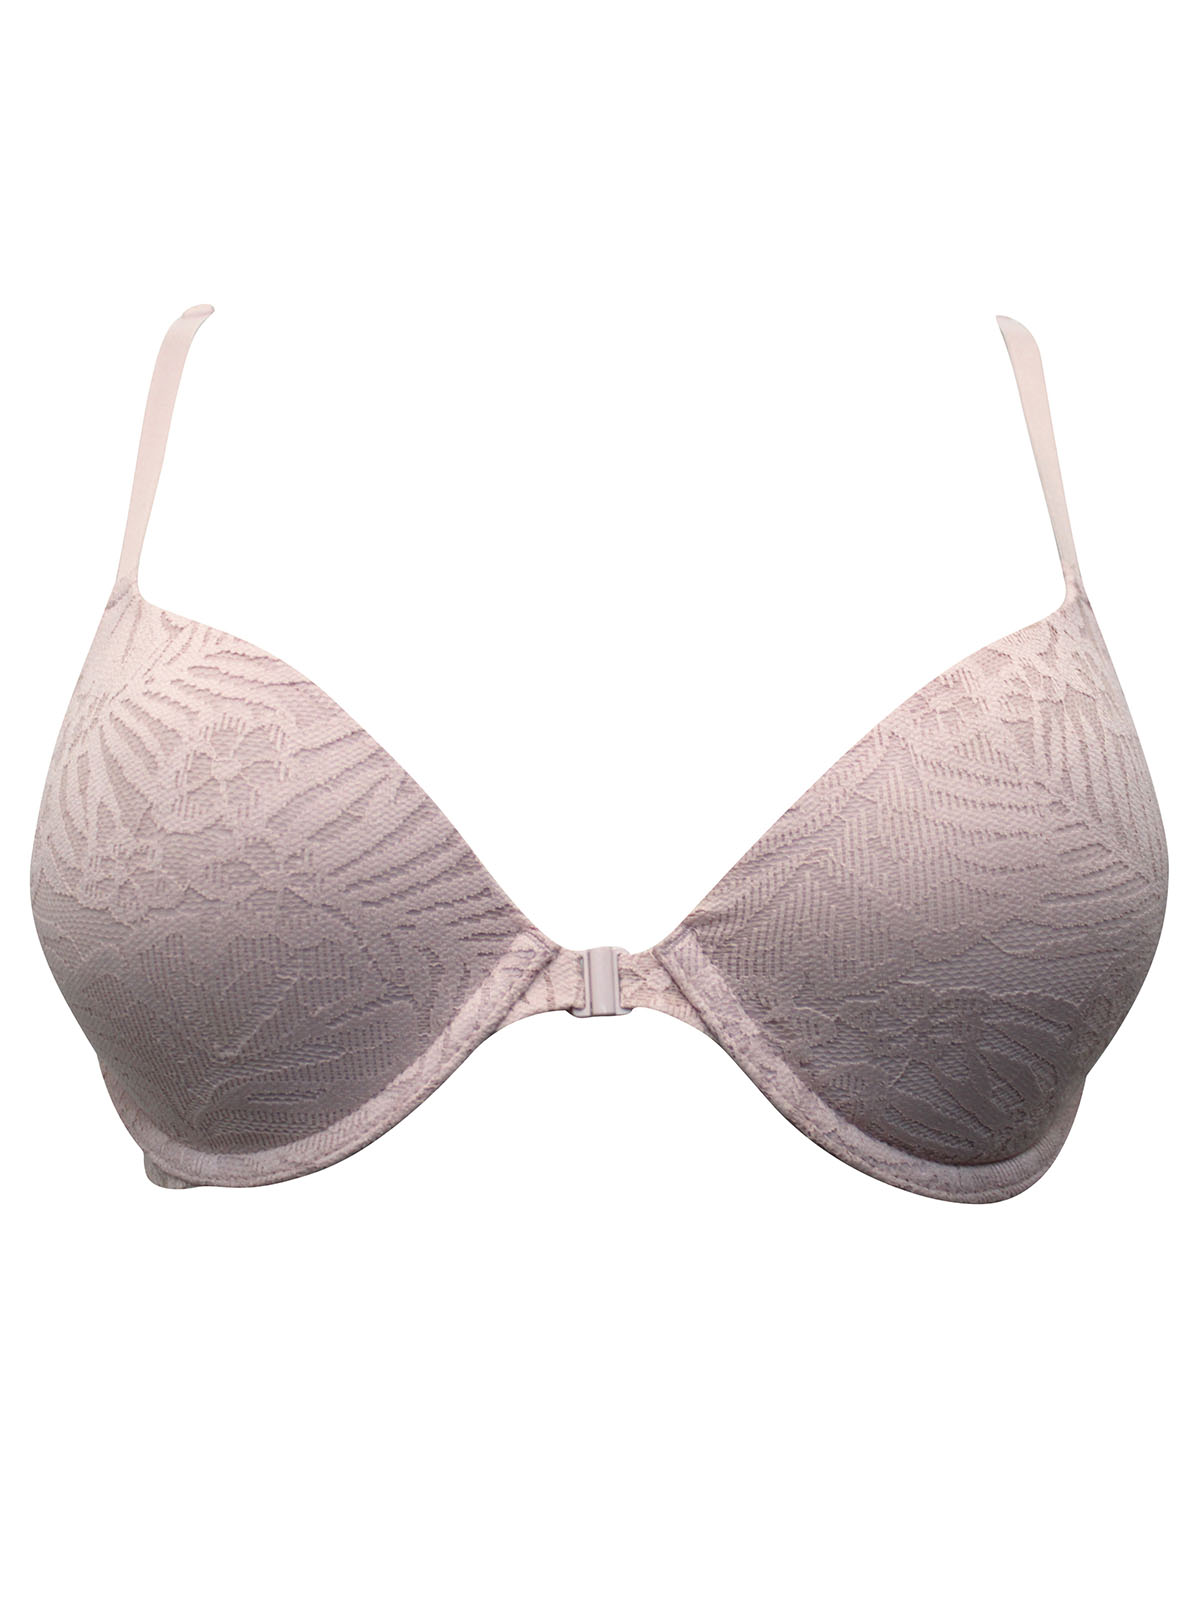 BLUSH Lace Overlay Wired Front Closure Bra - Size 36 (B cup)